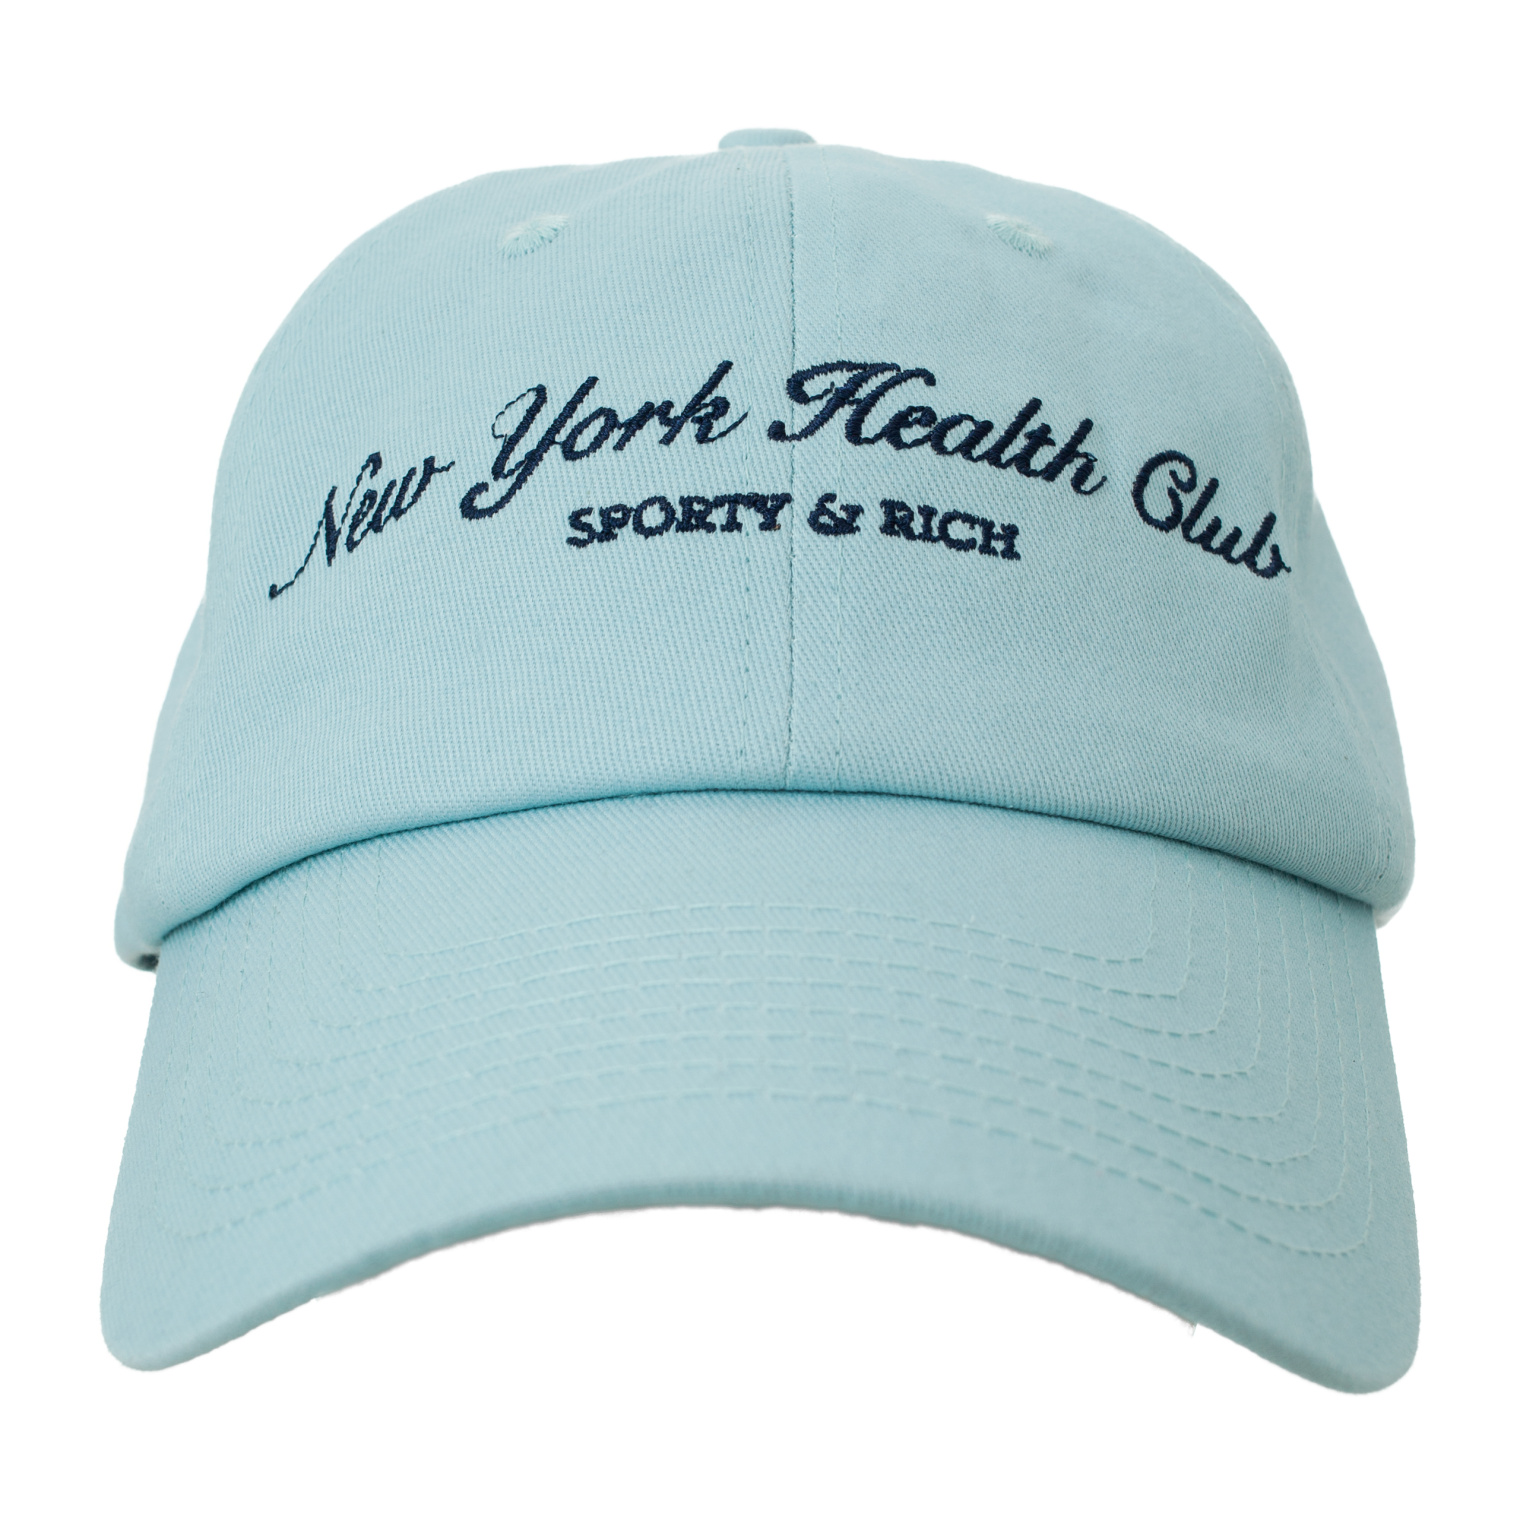 SPORTY & RICH \'NY Health Club\' embroidered cap